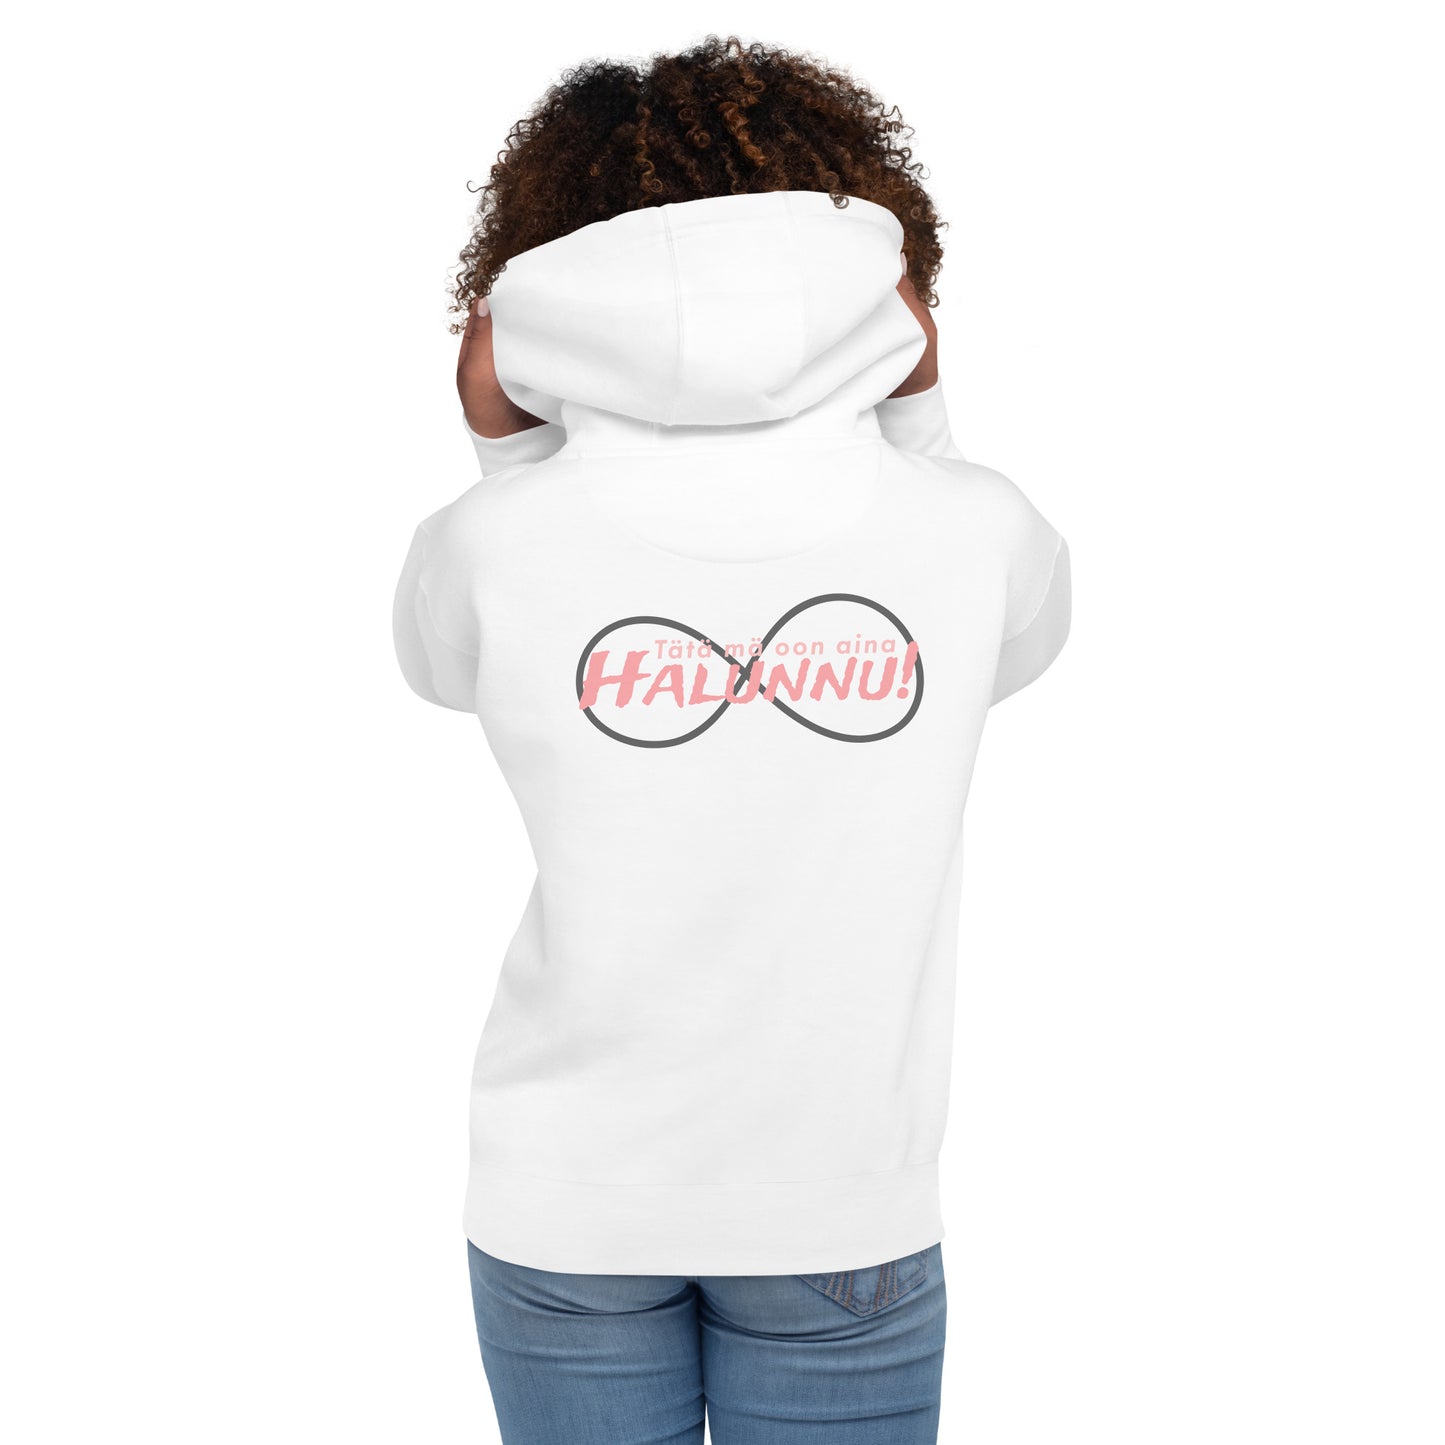 "This is what I wanted" women's hoodie (TikTok wish)